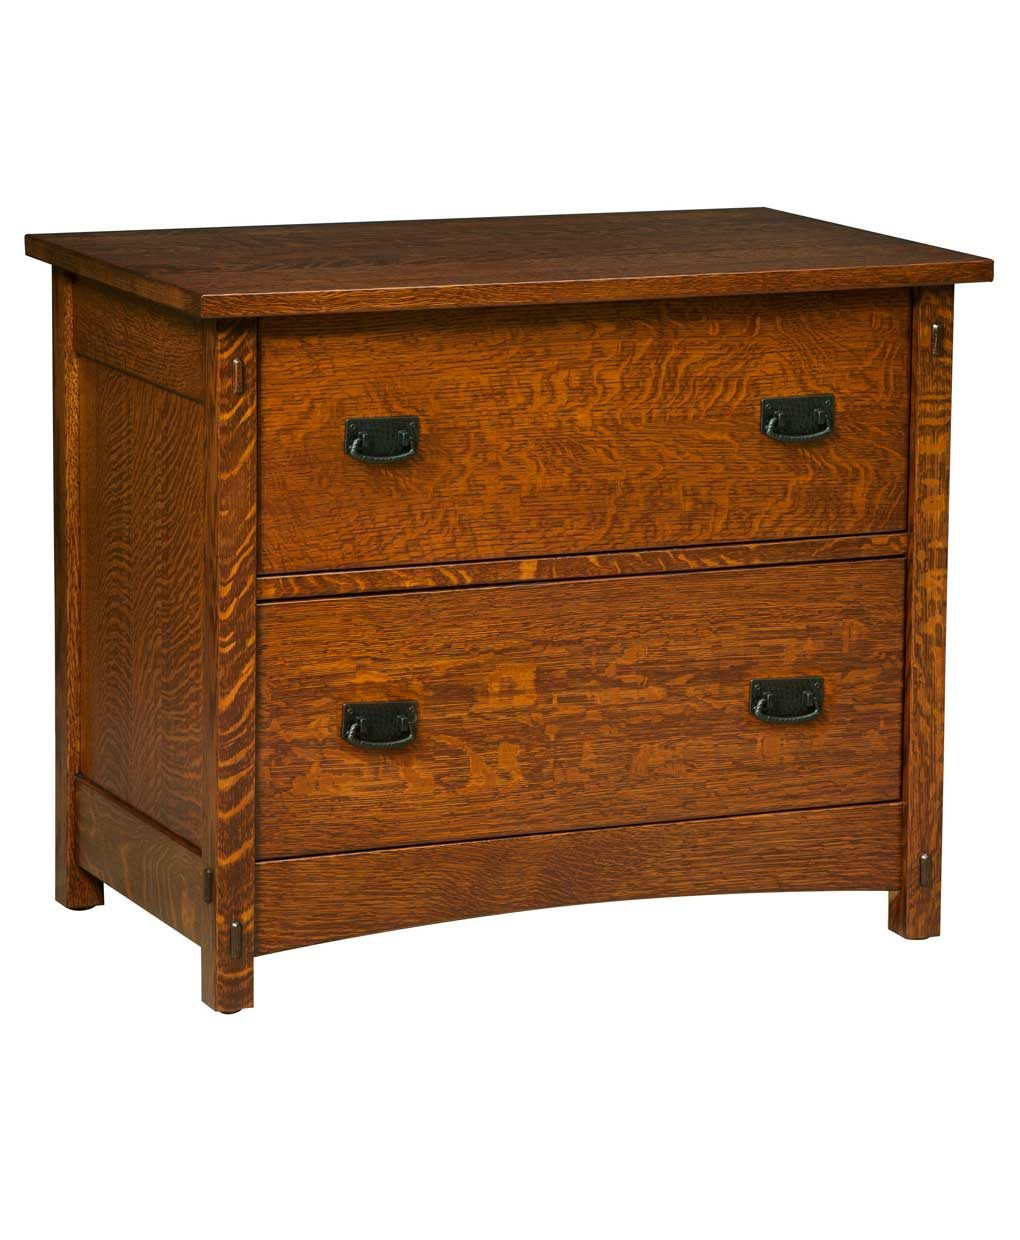 Signature Mission Lateral File Cabinet Amish Direct Furniture within dimensions 1020 X 1240